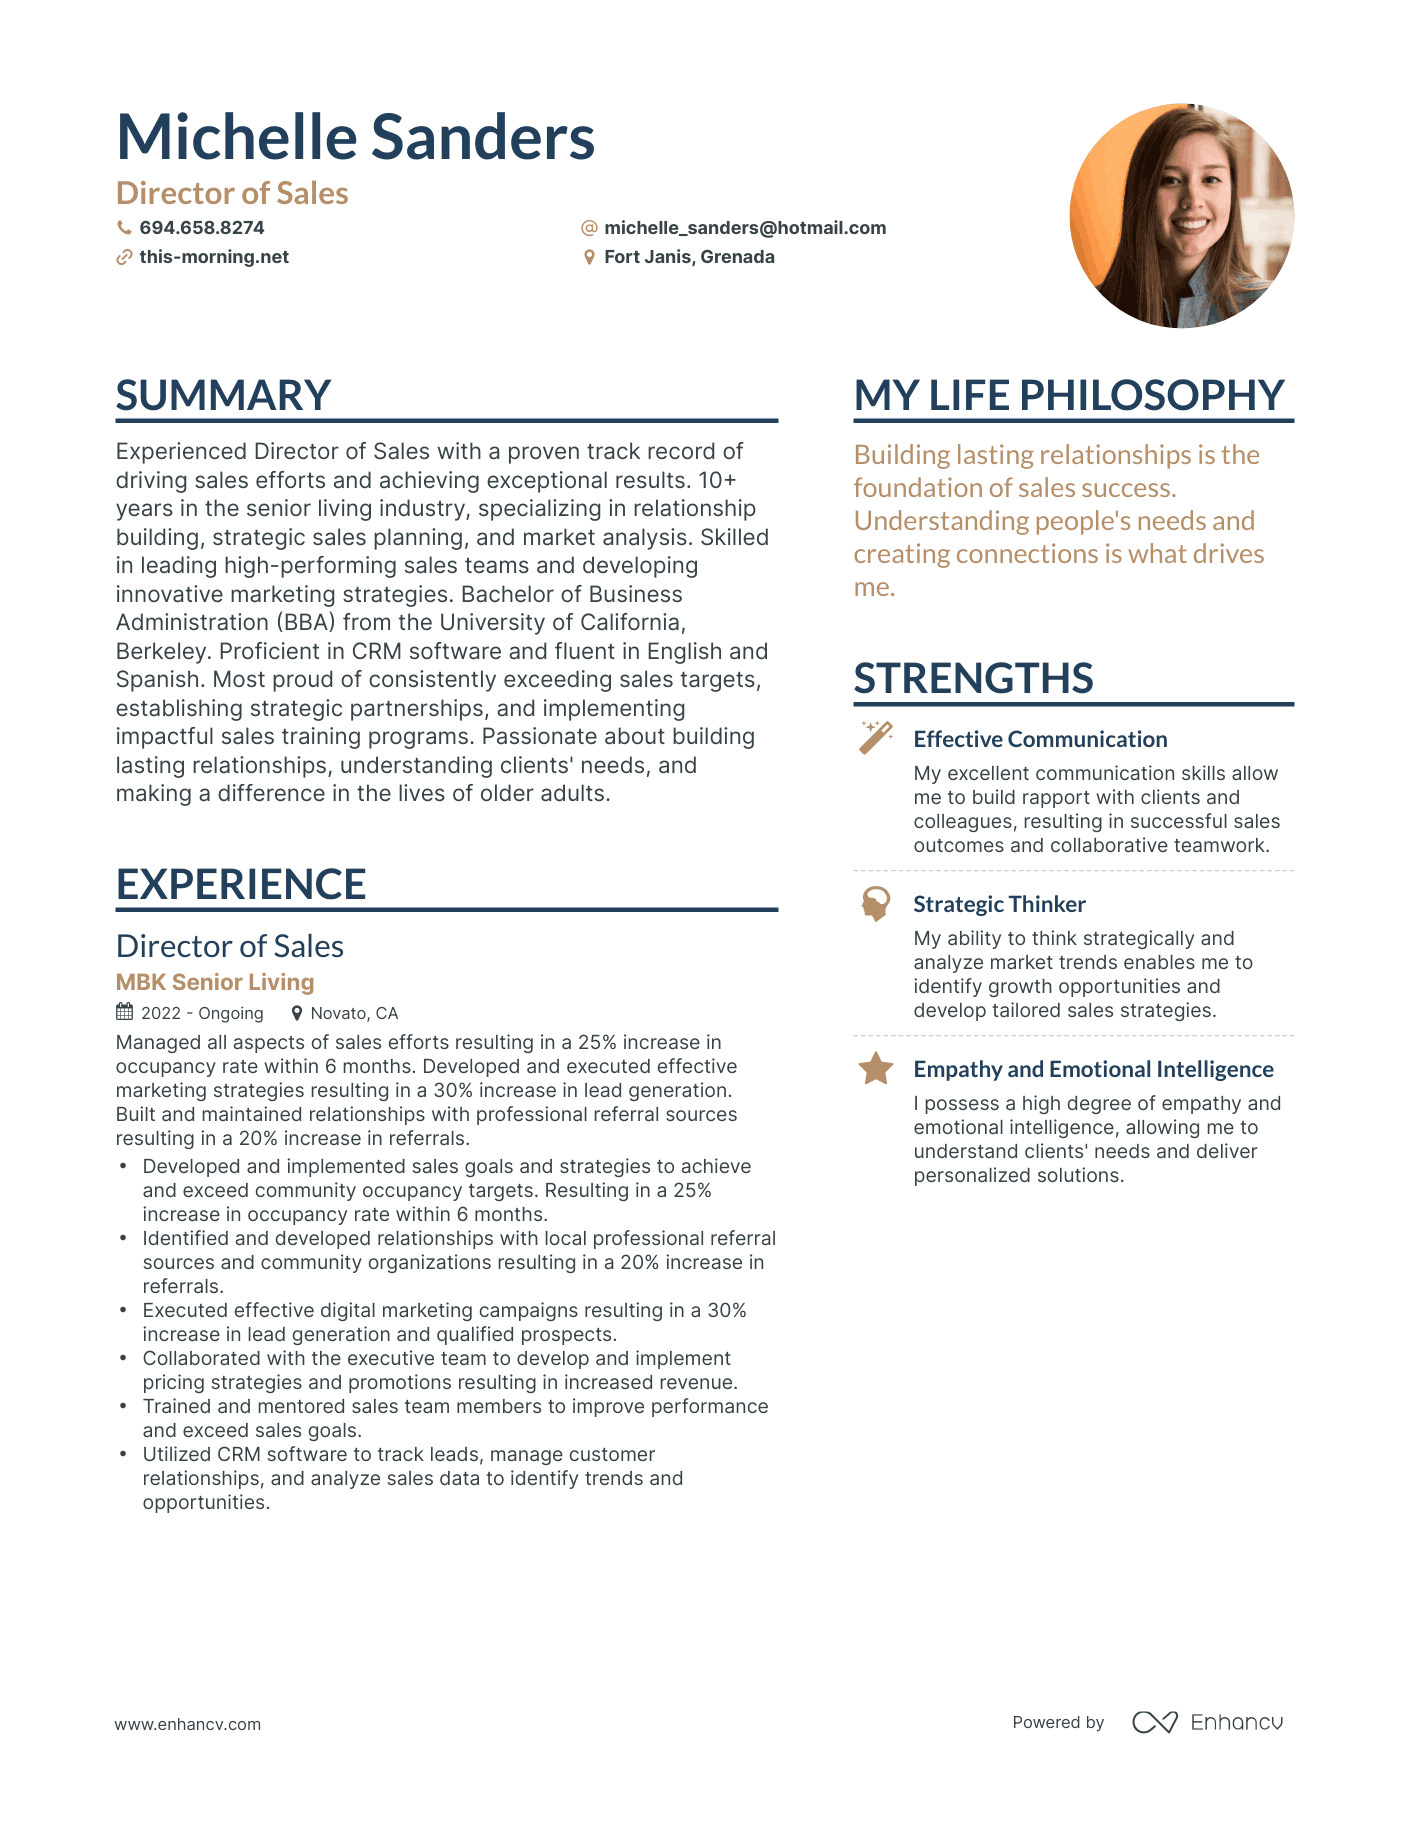 Director of Sales resume example